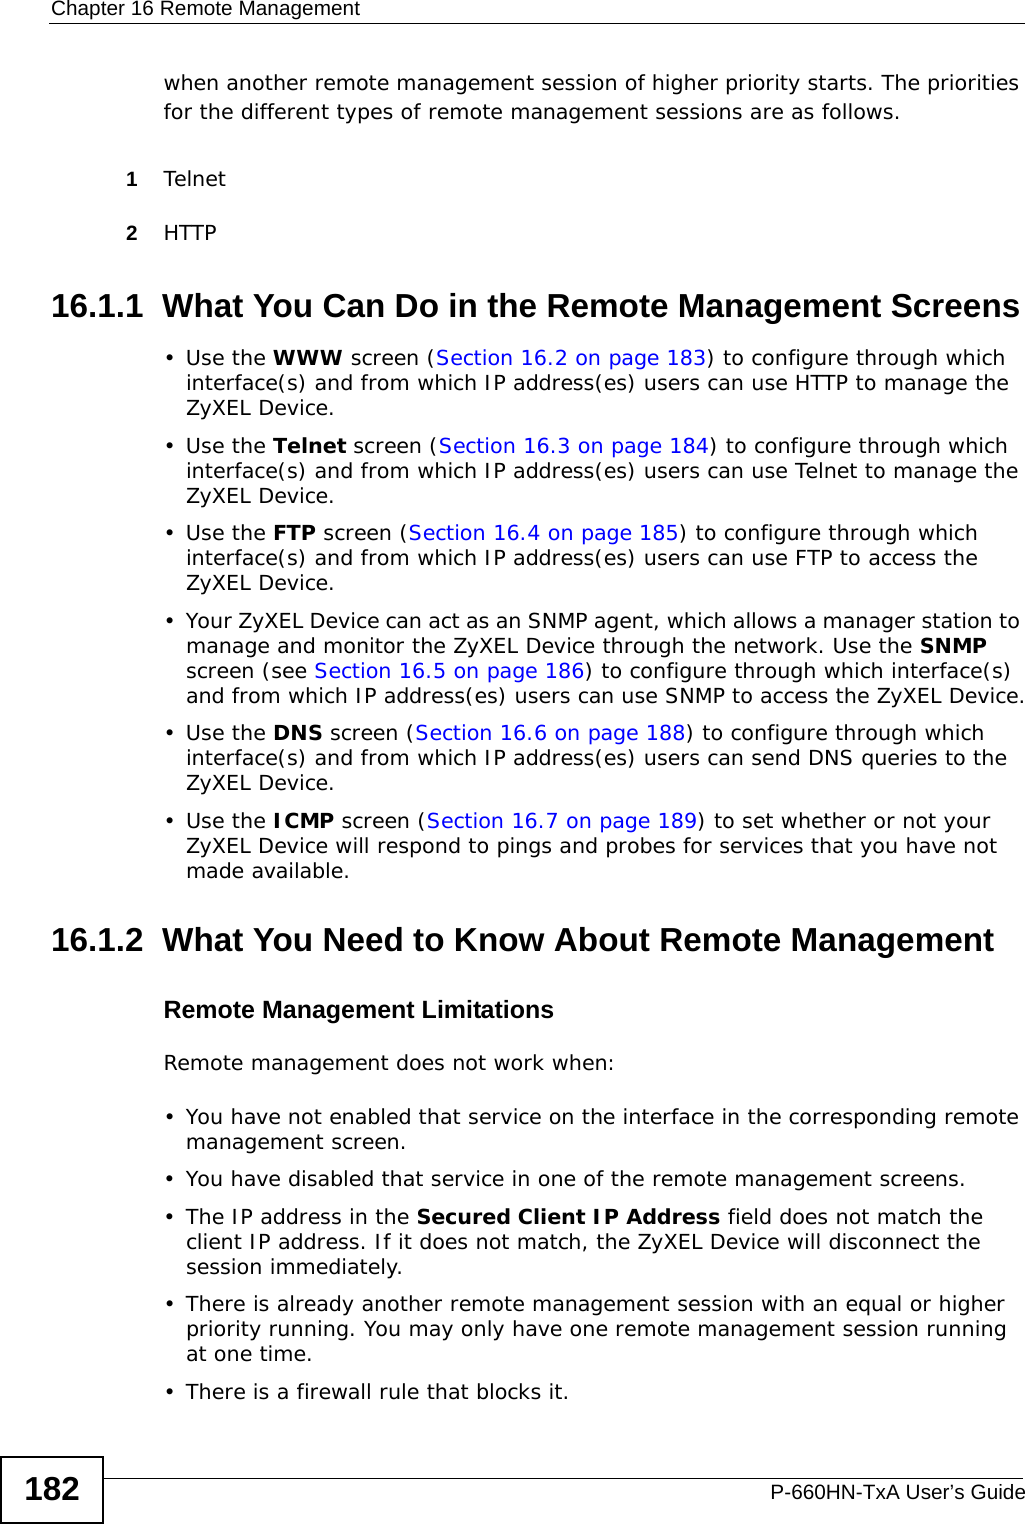 Chapter 16 Remote ManagementP-660HN-TxA User’s Guide182when another remote management session of higher priority starts. The priorities for the different types of remote management sessions are as follows.1Telnet2HTTP16.1.1  What You Can Do in the Remote Management Screens•Use the WWW screen (Section 16.2 on page 183) to configure through which interface(s) and from which IP address(es) users can use HTTP to manage the ZyXEL Device.•Use the Telnet screen (Section 16.3 on page 184) to configure through which interface(s) and from which IP address(es) users can use Telnet to manage the ZyXEL Device.•Use the FTP screen (Section 16.4 on page 185) to configure through which interface(s) and from which IP address(es) users can use FTP to access the ZyXEL Device.• Your ZyXEL Device can act as an SNMP agent, which allows a manager station to manage and monitor the ZyXEL Device through the network. Use the SNMP screen (see Section 16.5 on page 186) to configure through which interface(s) and from which IP address(es) users can use SNMP to access the ZyXEL Device.•Use the DNS screen (Section 16.6 on page 188) to configure through which interface(s) and from which IP address(es) users can send DNS queries to the ZyXEL Device.•Use the ICMP screen (Section 16.7 on page 189) to set whether or not your ZyXEL Device will respond to pings and probes for services that you have not made available.16.1.2  What You Need to Know About Remote ManagementRemote Management LimitationsRemote management does not work when:• You have not enabled that service on the interface in the corresponding remote management screen.• You have disabled that service in one of the remote management screens.• The IP address in the Secured Client IP Address field does not match the client IP address. If it does not match, the ZyXEL Device will disconnect the session immediately.• There is already another remote management session with an equal or higher priority running. You may only have one remote management session running at one time.• There is a firewall rule that blocks it.